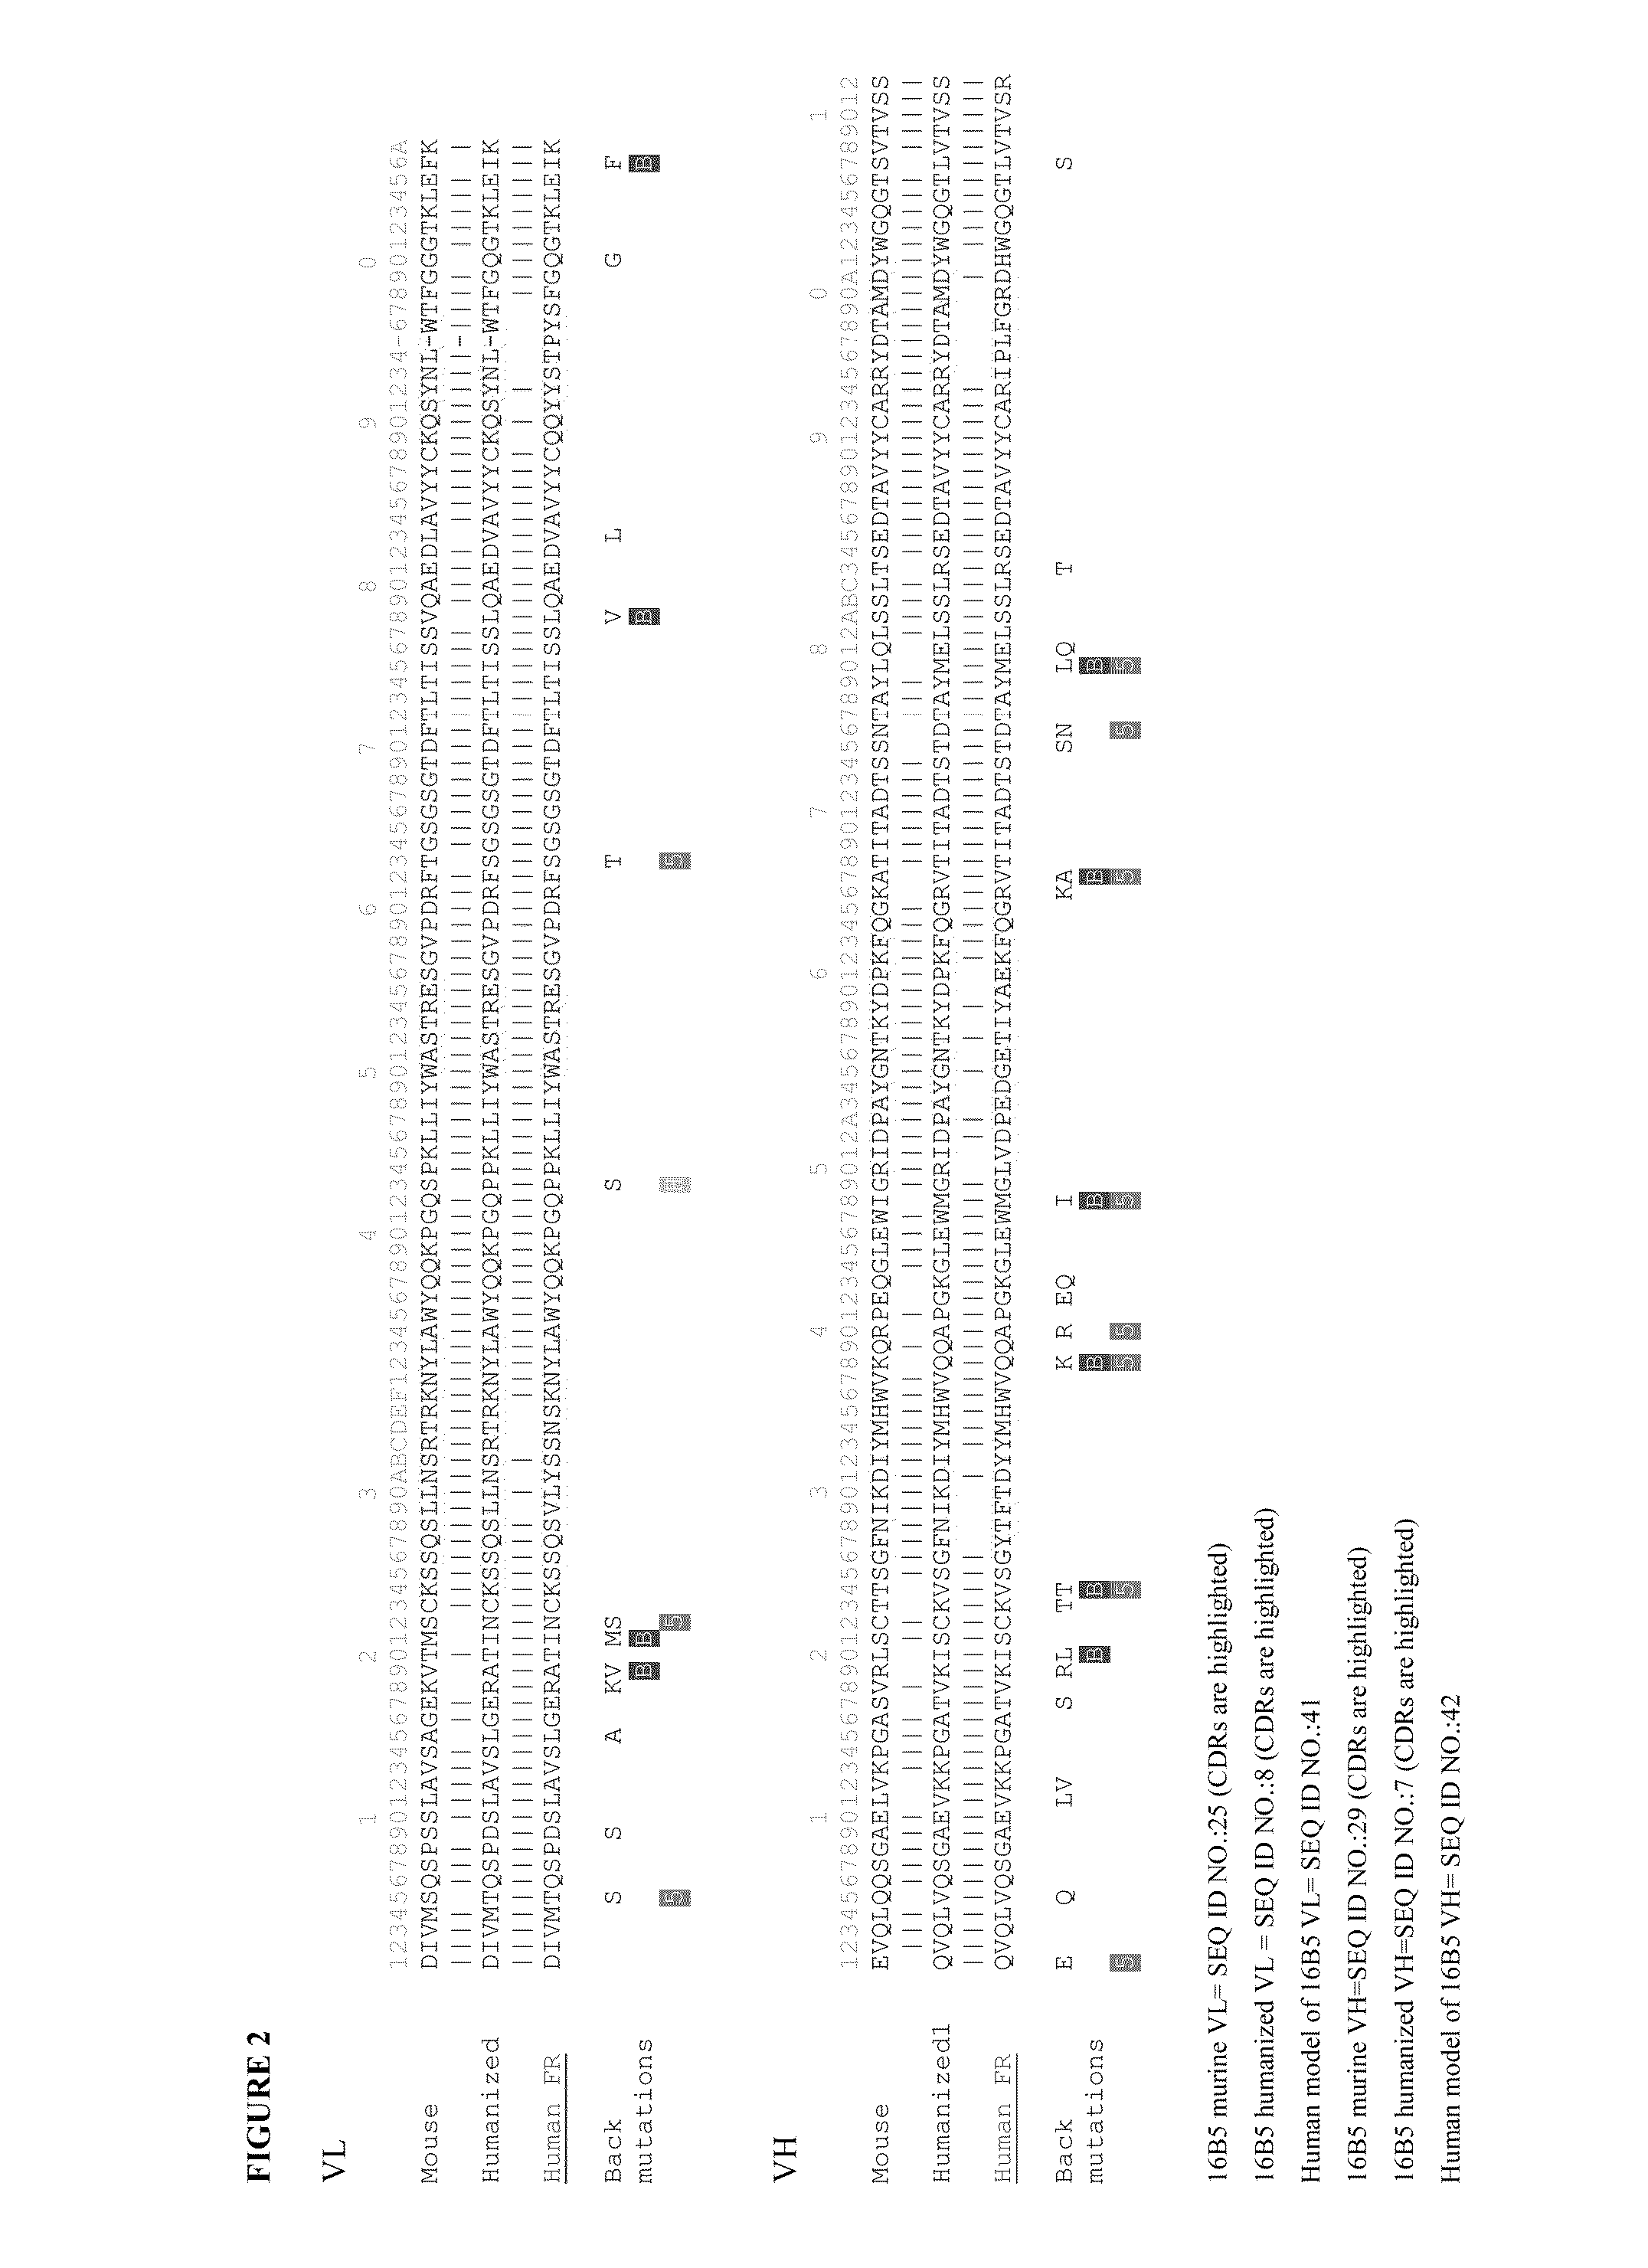 Anti-clusterin antibodies and antigen binding fragments and their use to reduce tumor volume